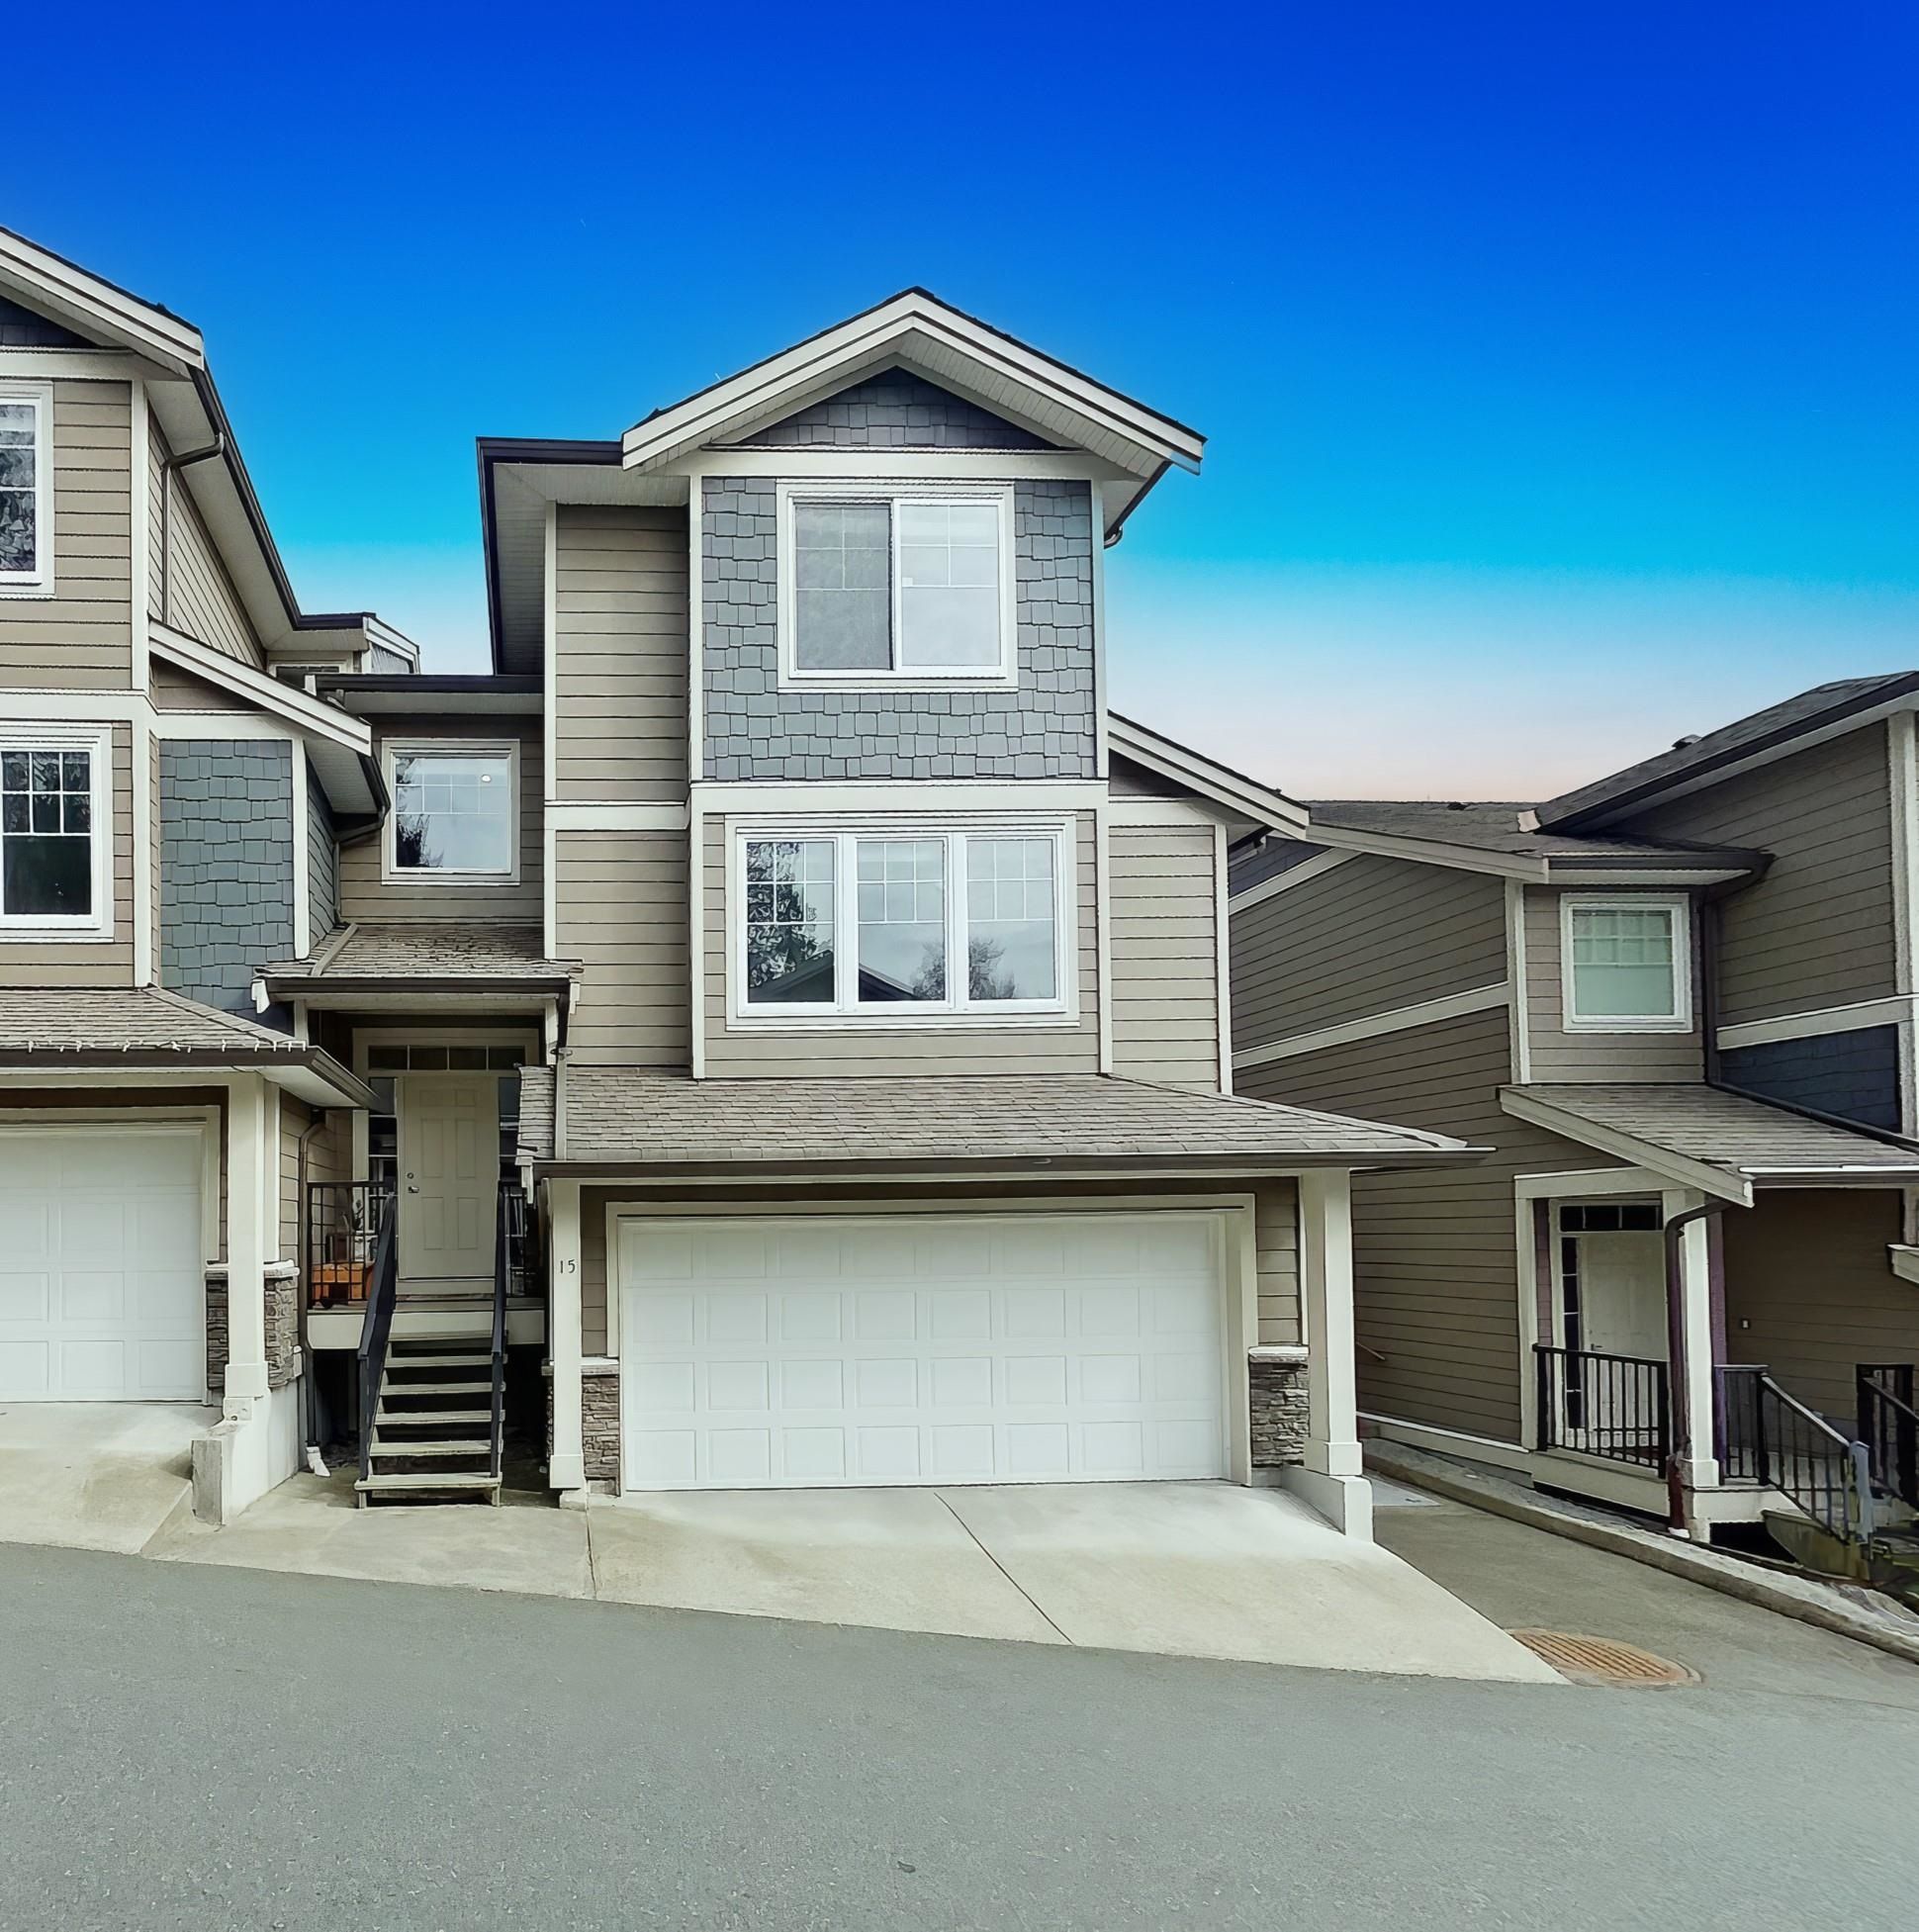 Neighbourhood Real Estate has just listed ANOTHER home in East Central, Maple Ridge